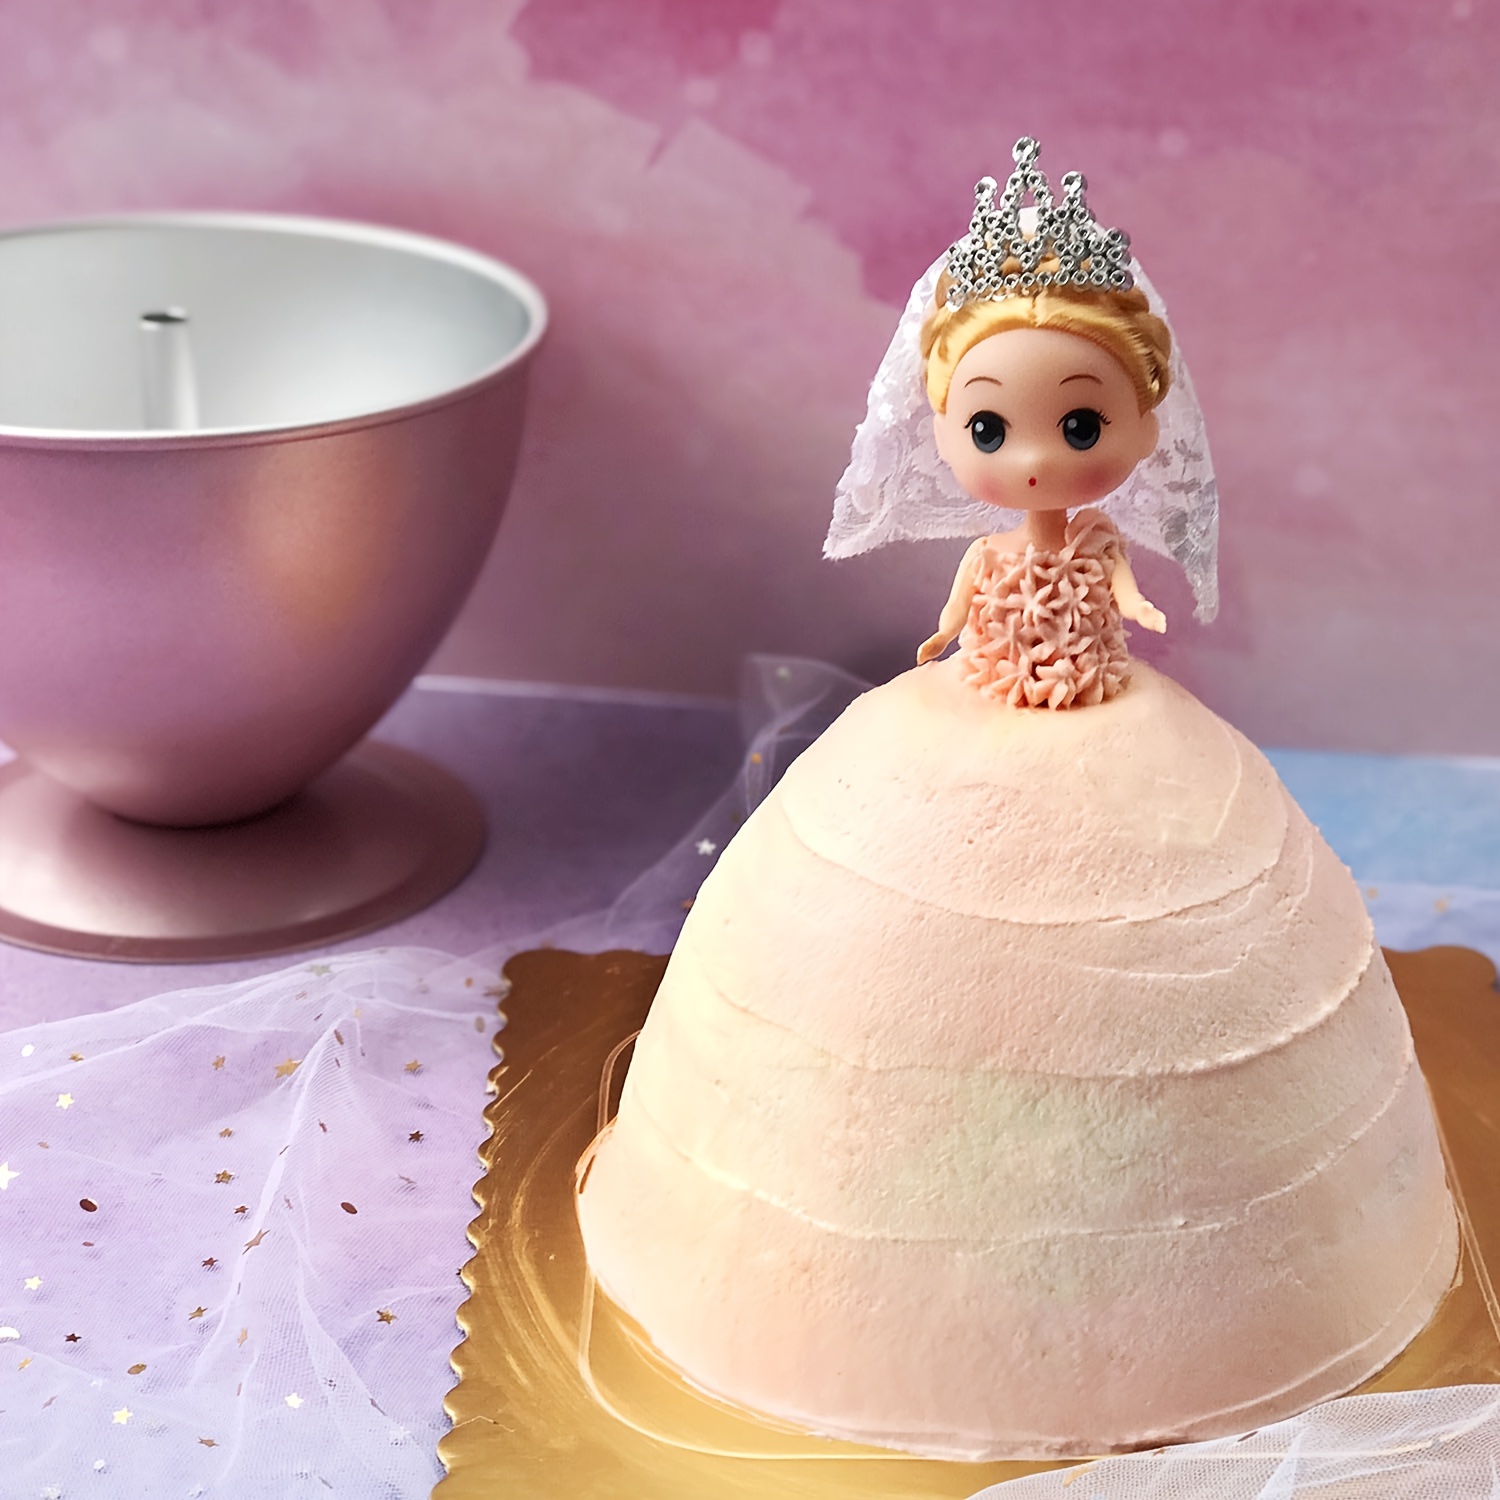 Bakers Pardise 2kg Doll Mould With Decorative Doll Topper Cake Topper Price  in India - Buy Bakers Pardise 2kg Doll Mould With Decorative Doll Topper  Cake Topper online at Flipkart.com